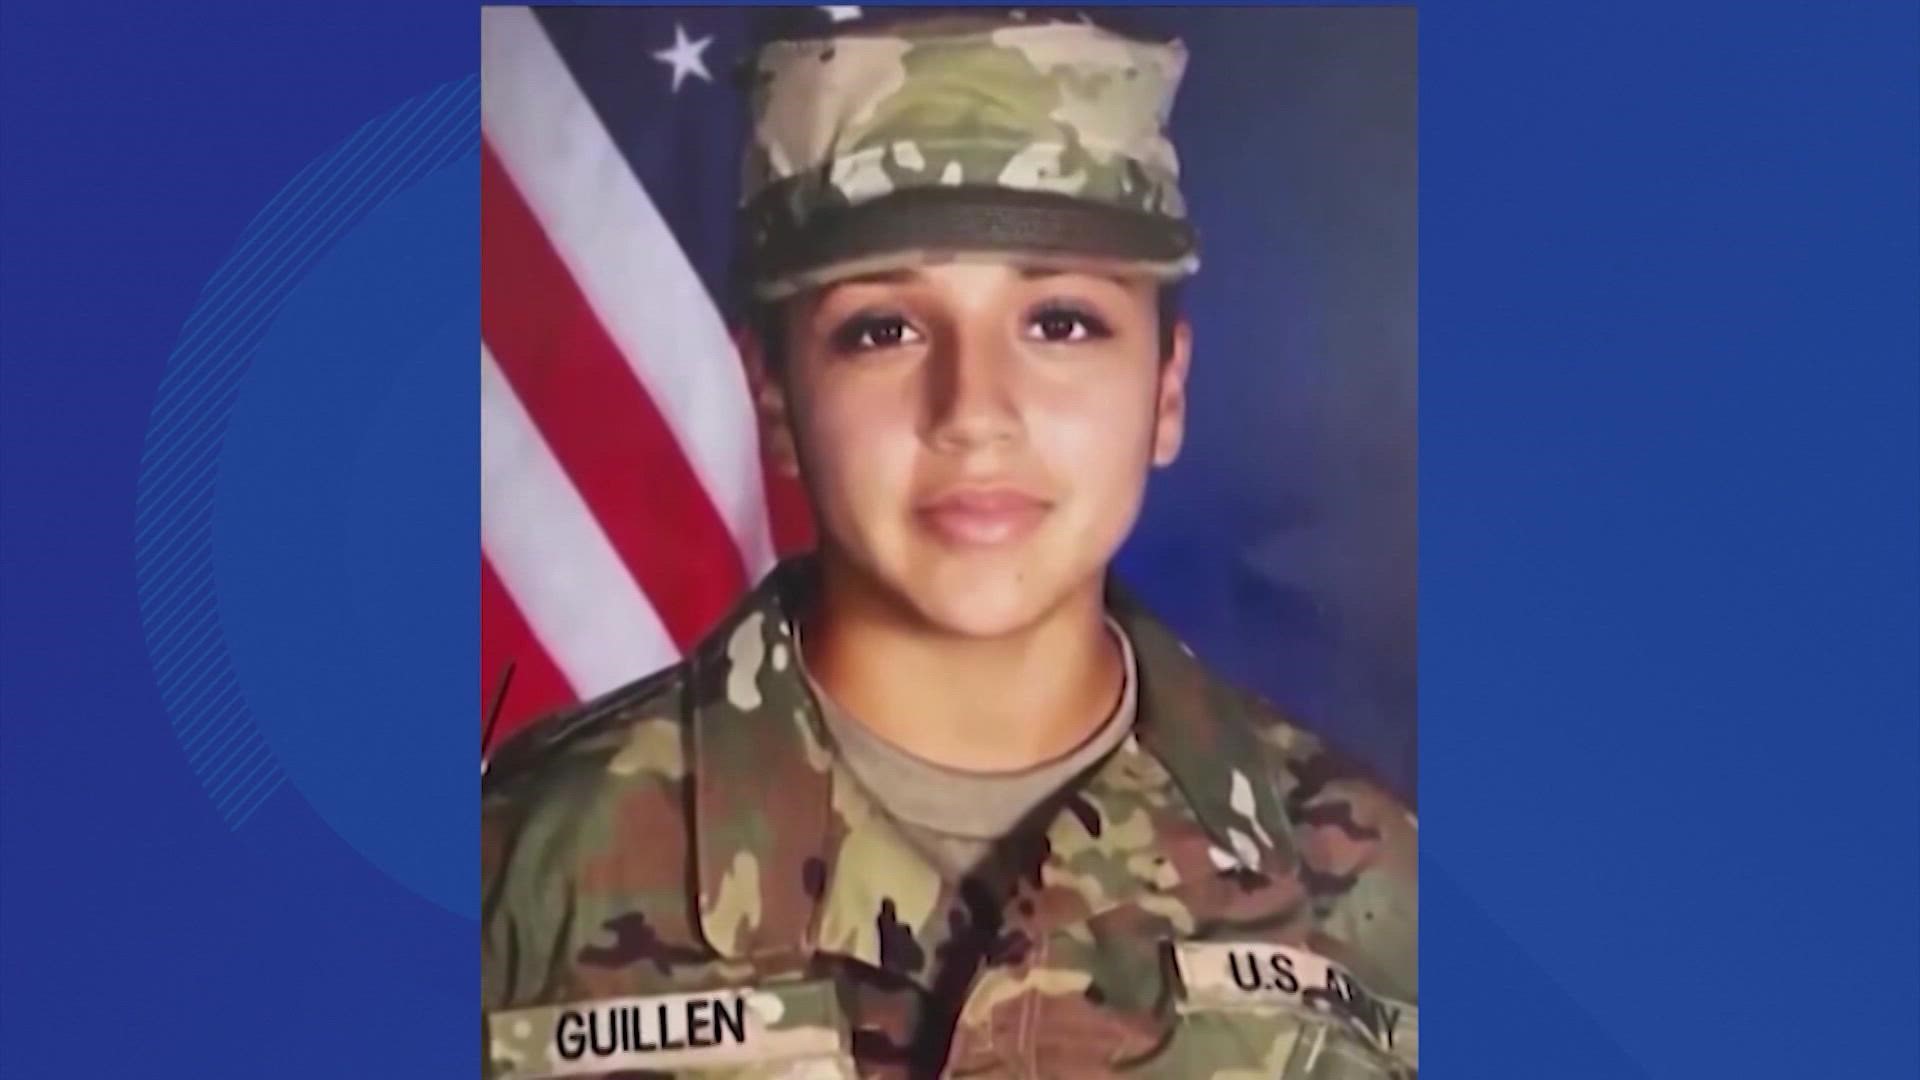 Documents also reveal authorities found blood in the armory room where Guillen was killed, but not until roughly two and a half months after she went missing.